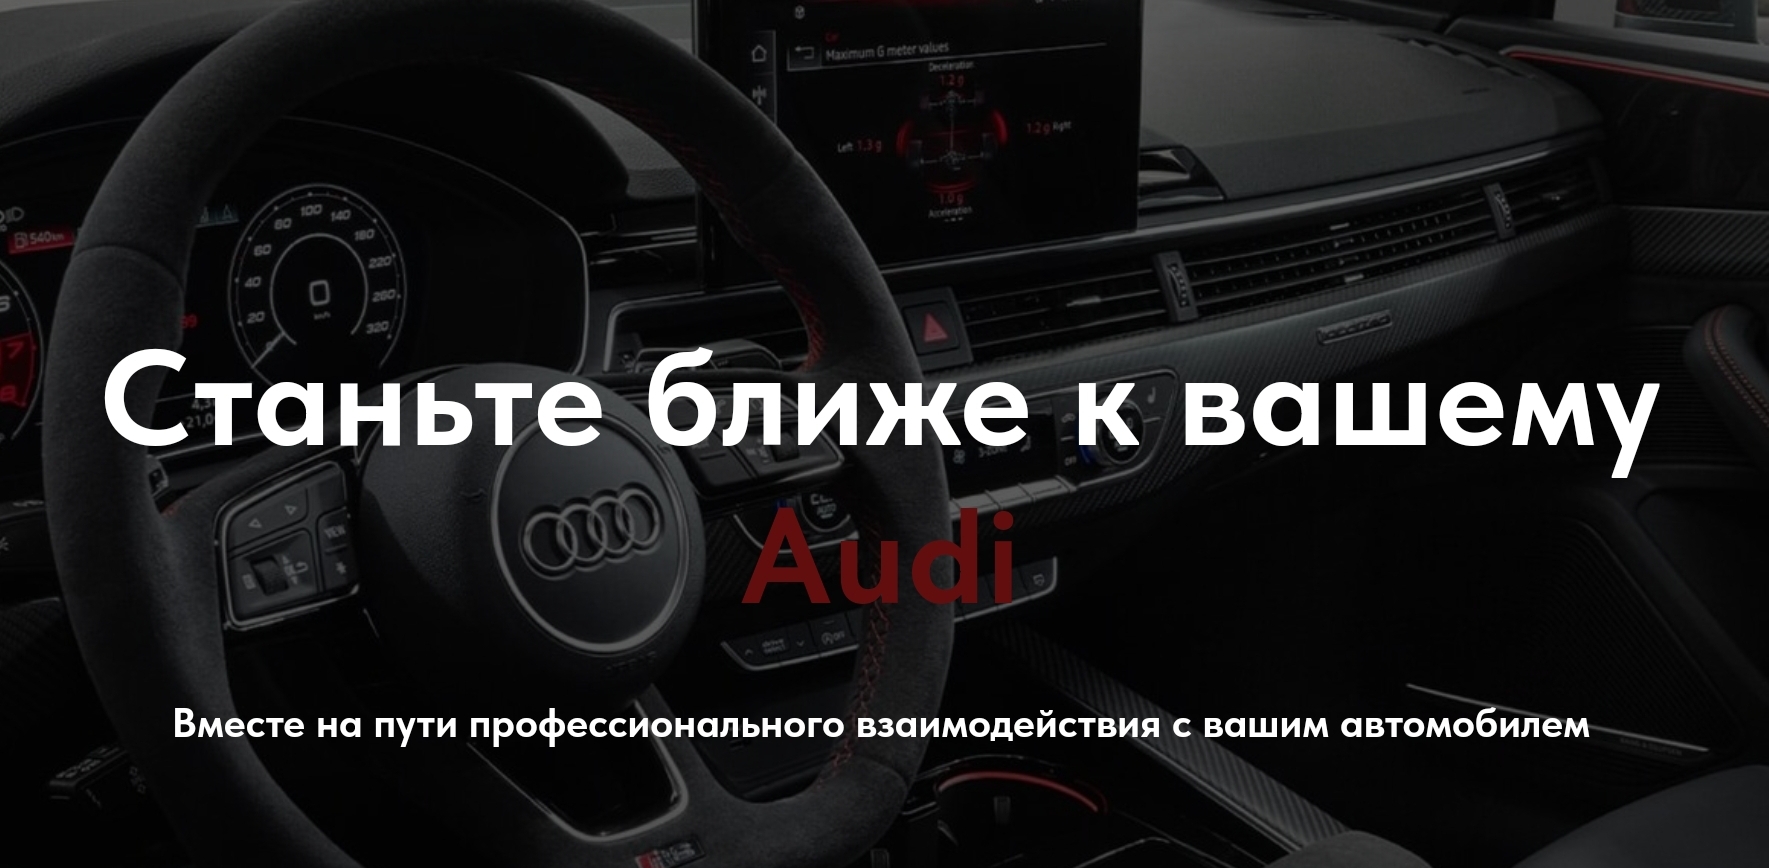 Audi know-how